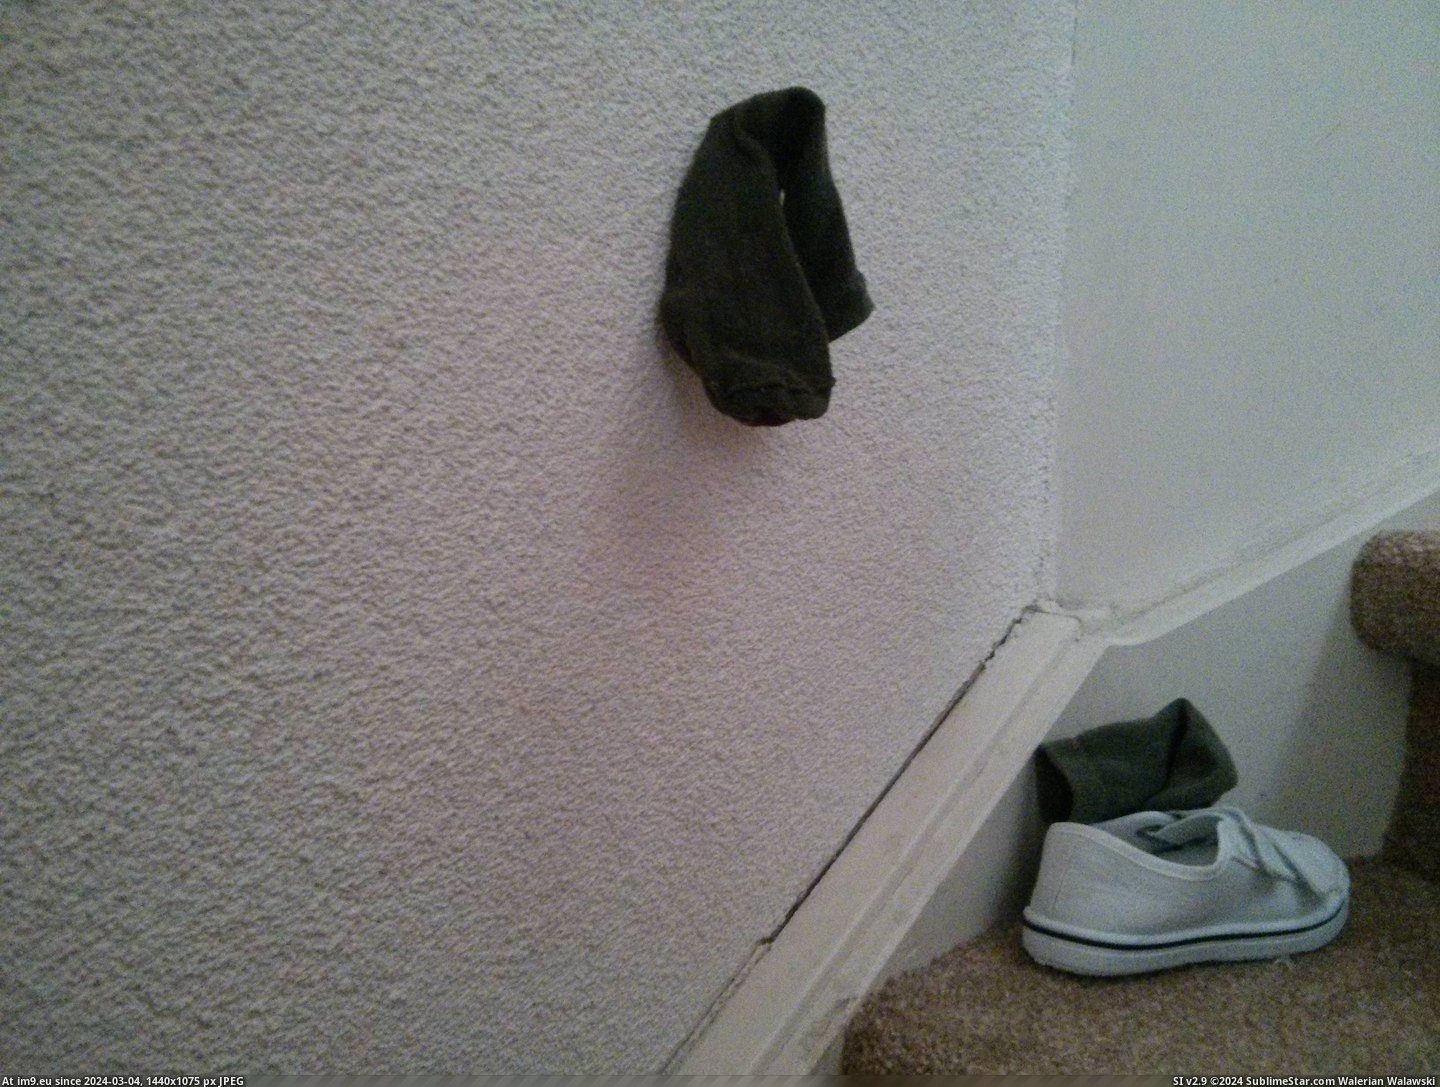 #One #Wall #Stairs #Tossed #Sticked #Son #Socks [Mildlyinteresting] When I tossed my son's socks on the stairs one of them sticked to the wall Pic. (Bild von album My r/MILDLYINTERESTING favs))